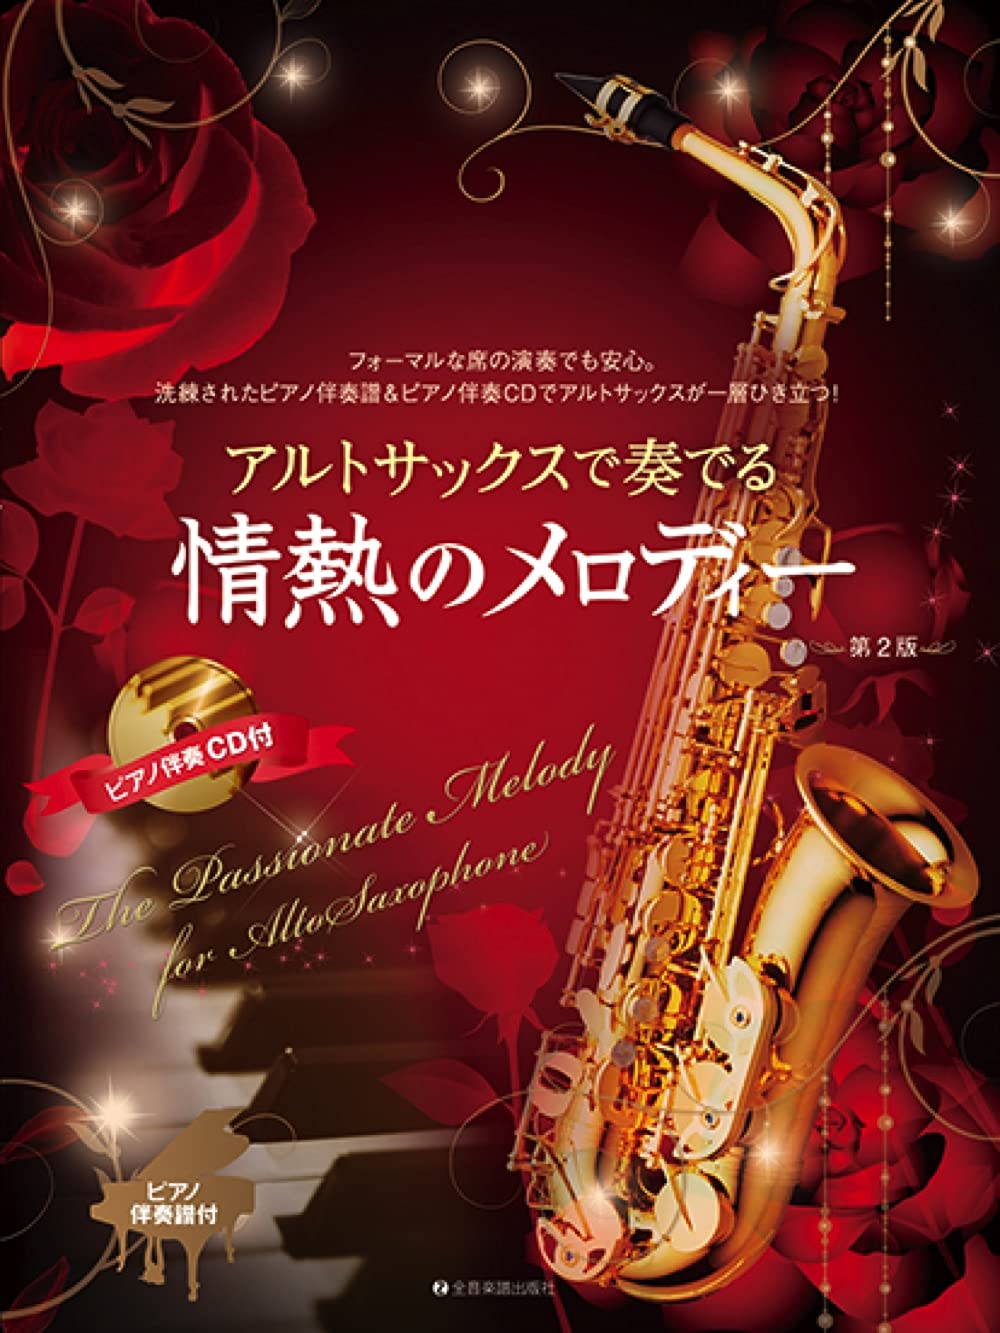 The Passionate Melody for Alto Saxophone with Piano accompaniment w/CD